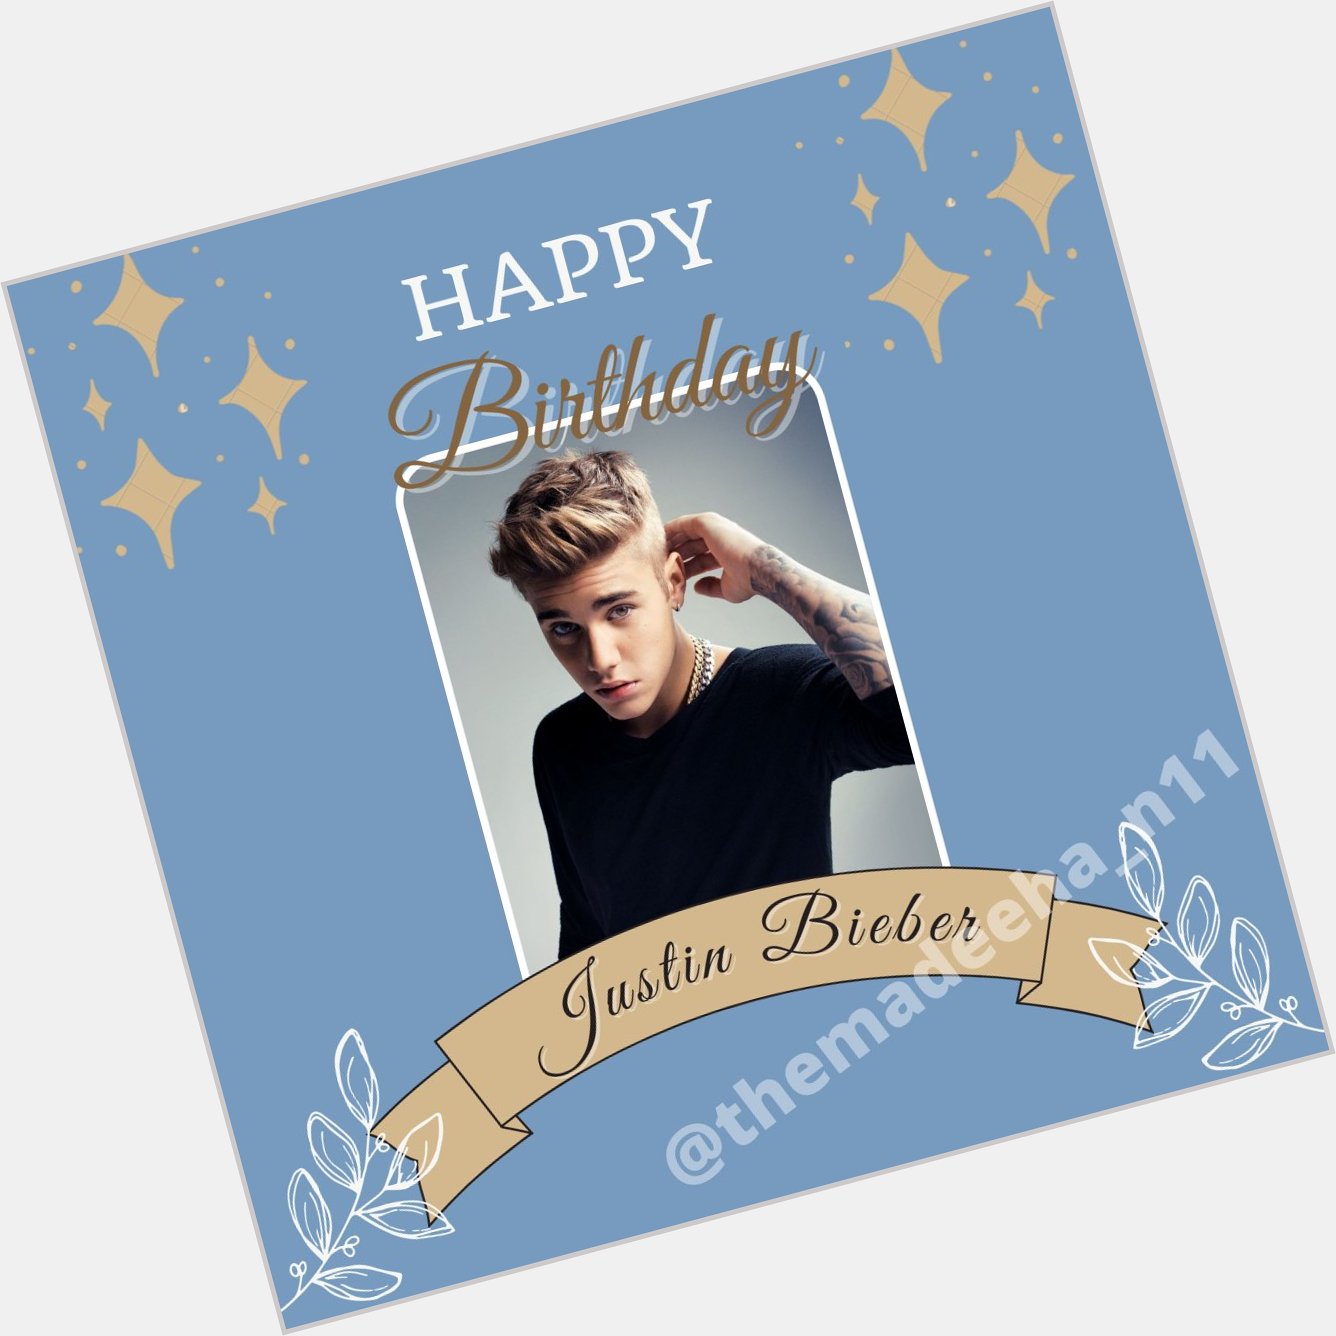 Happy Birthday to you Justin Bieber!! Love you    